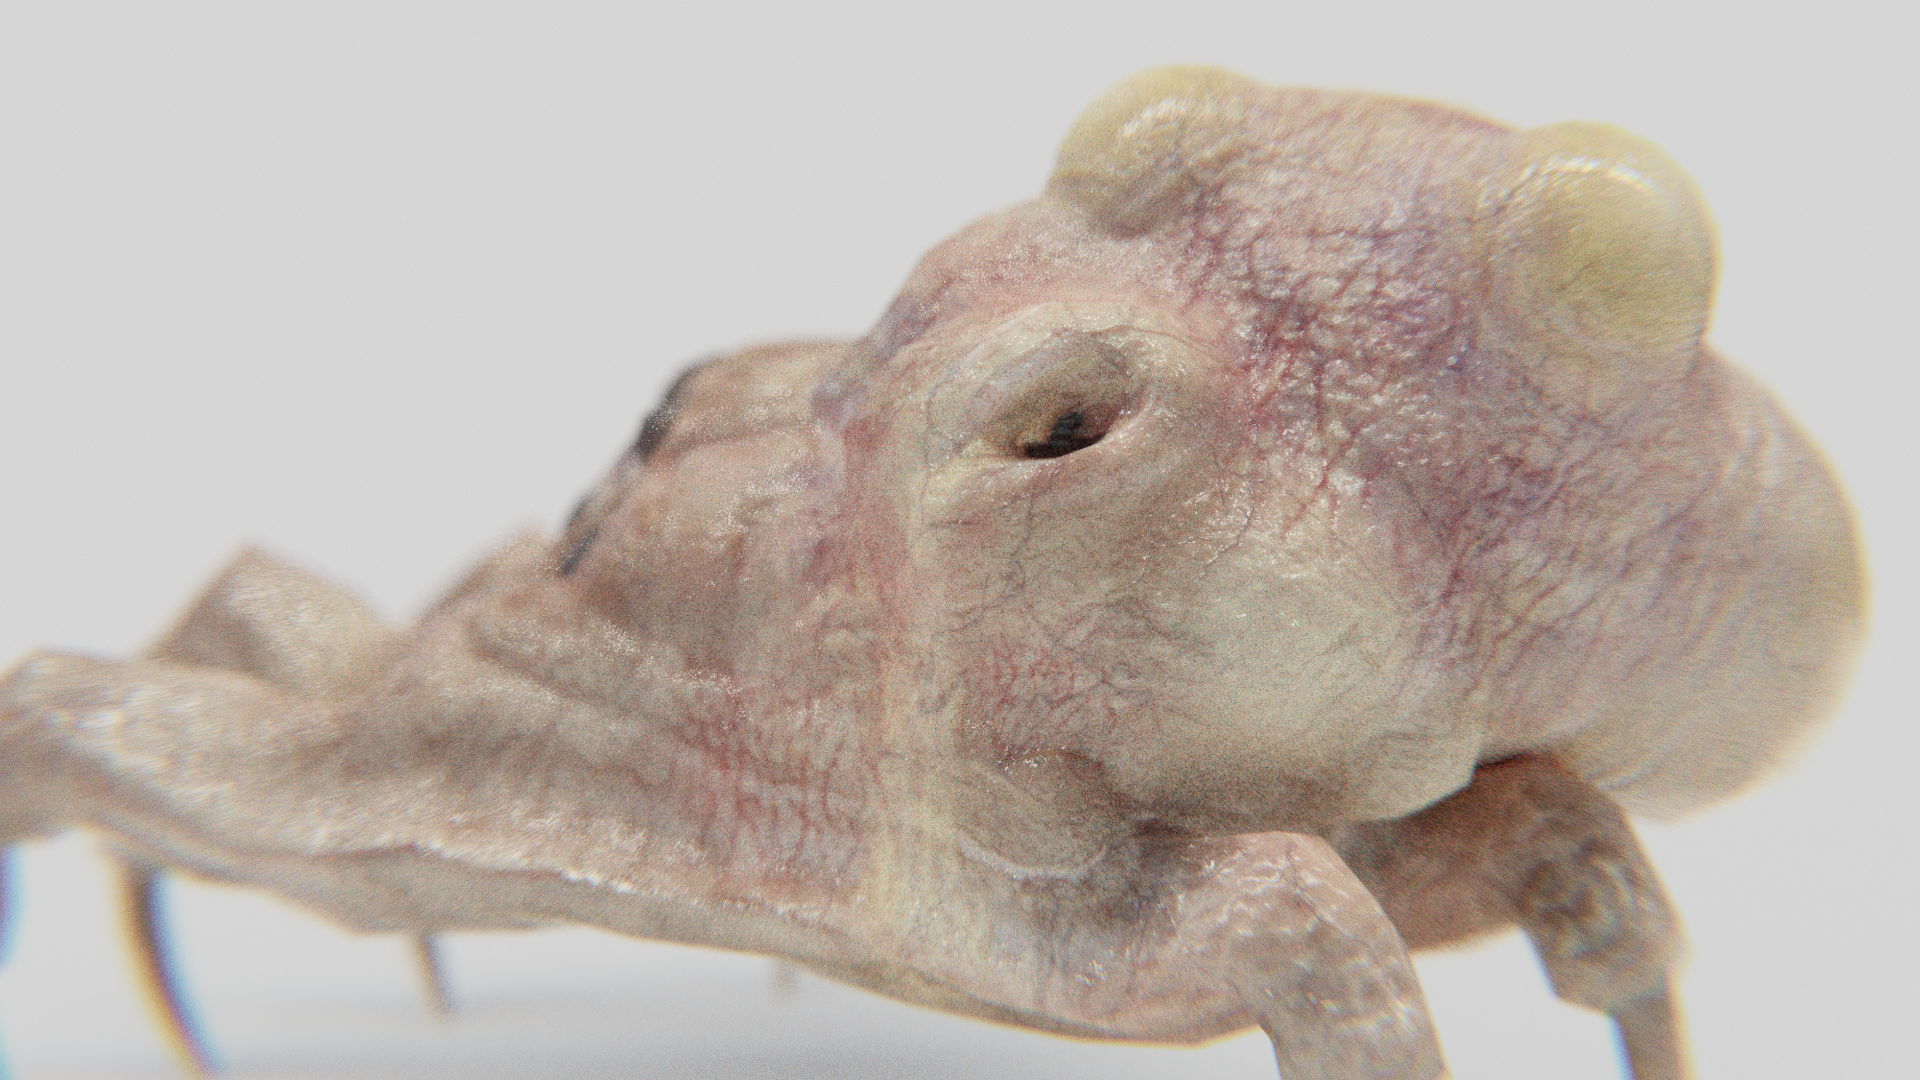 Kranion Plague Spreader Hind-View - 3d Model of Facehugger or Headcrab